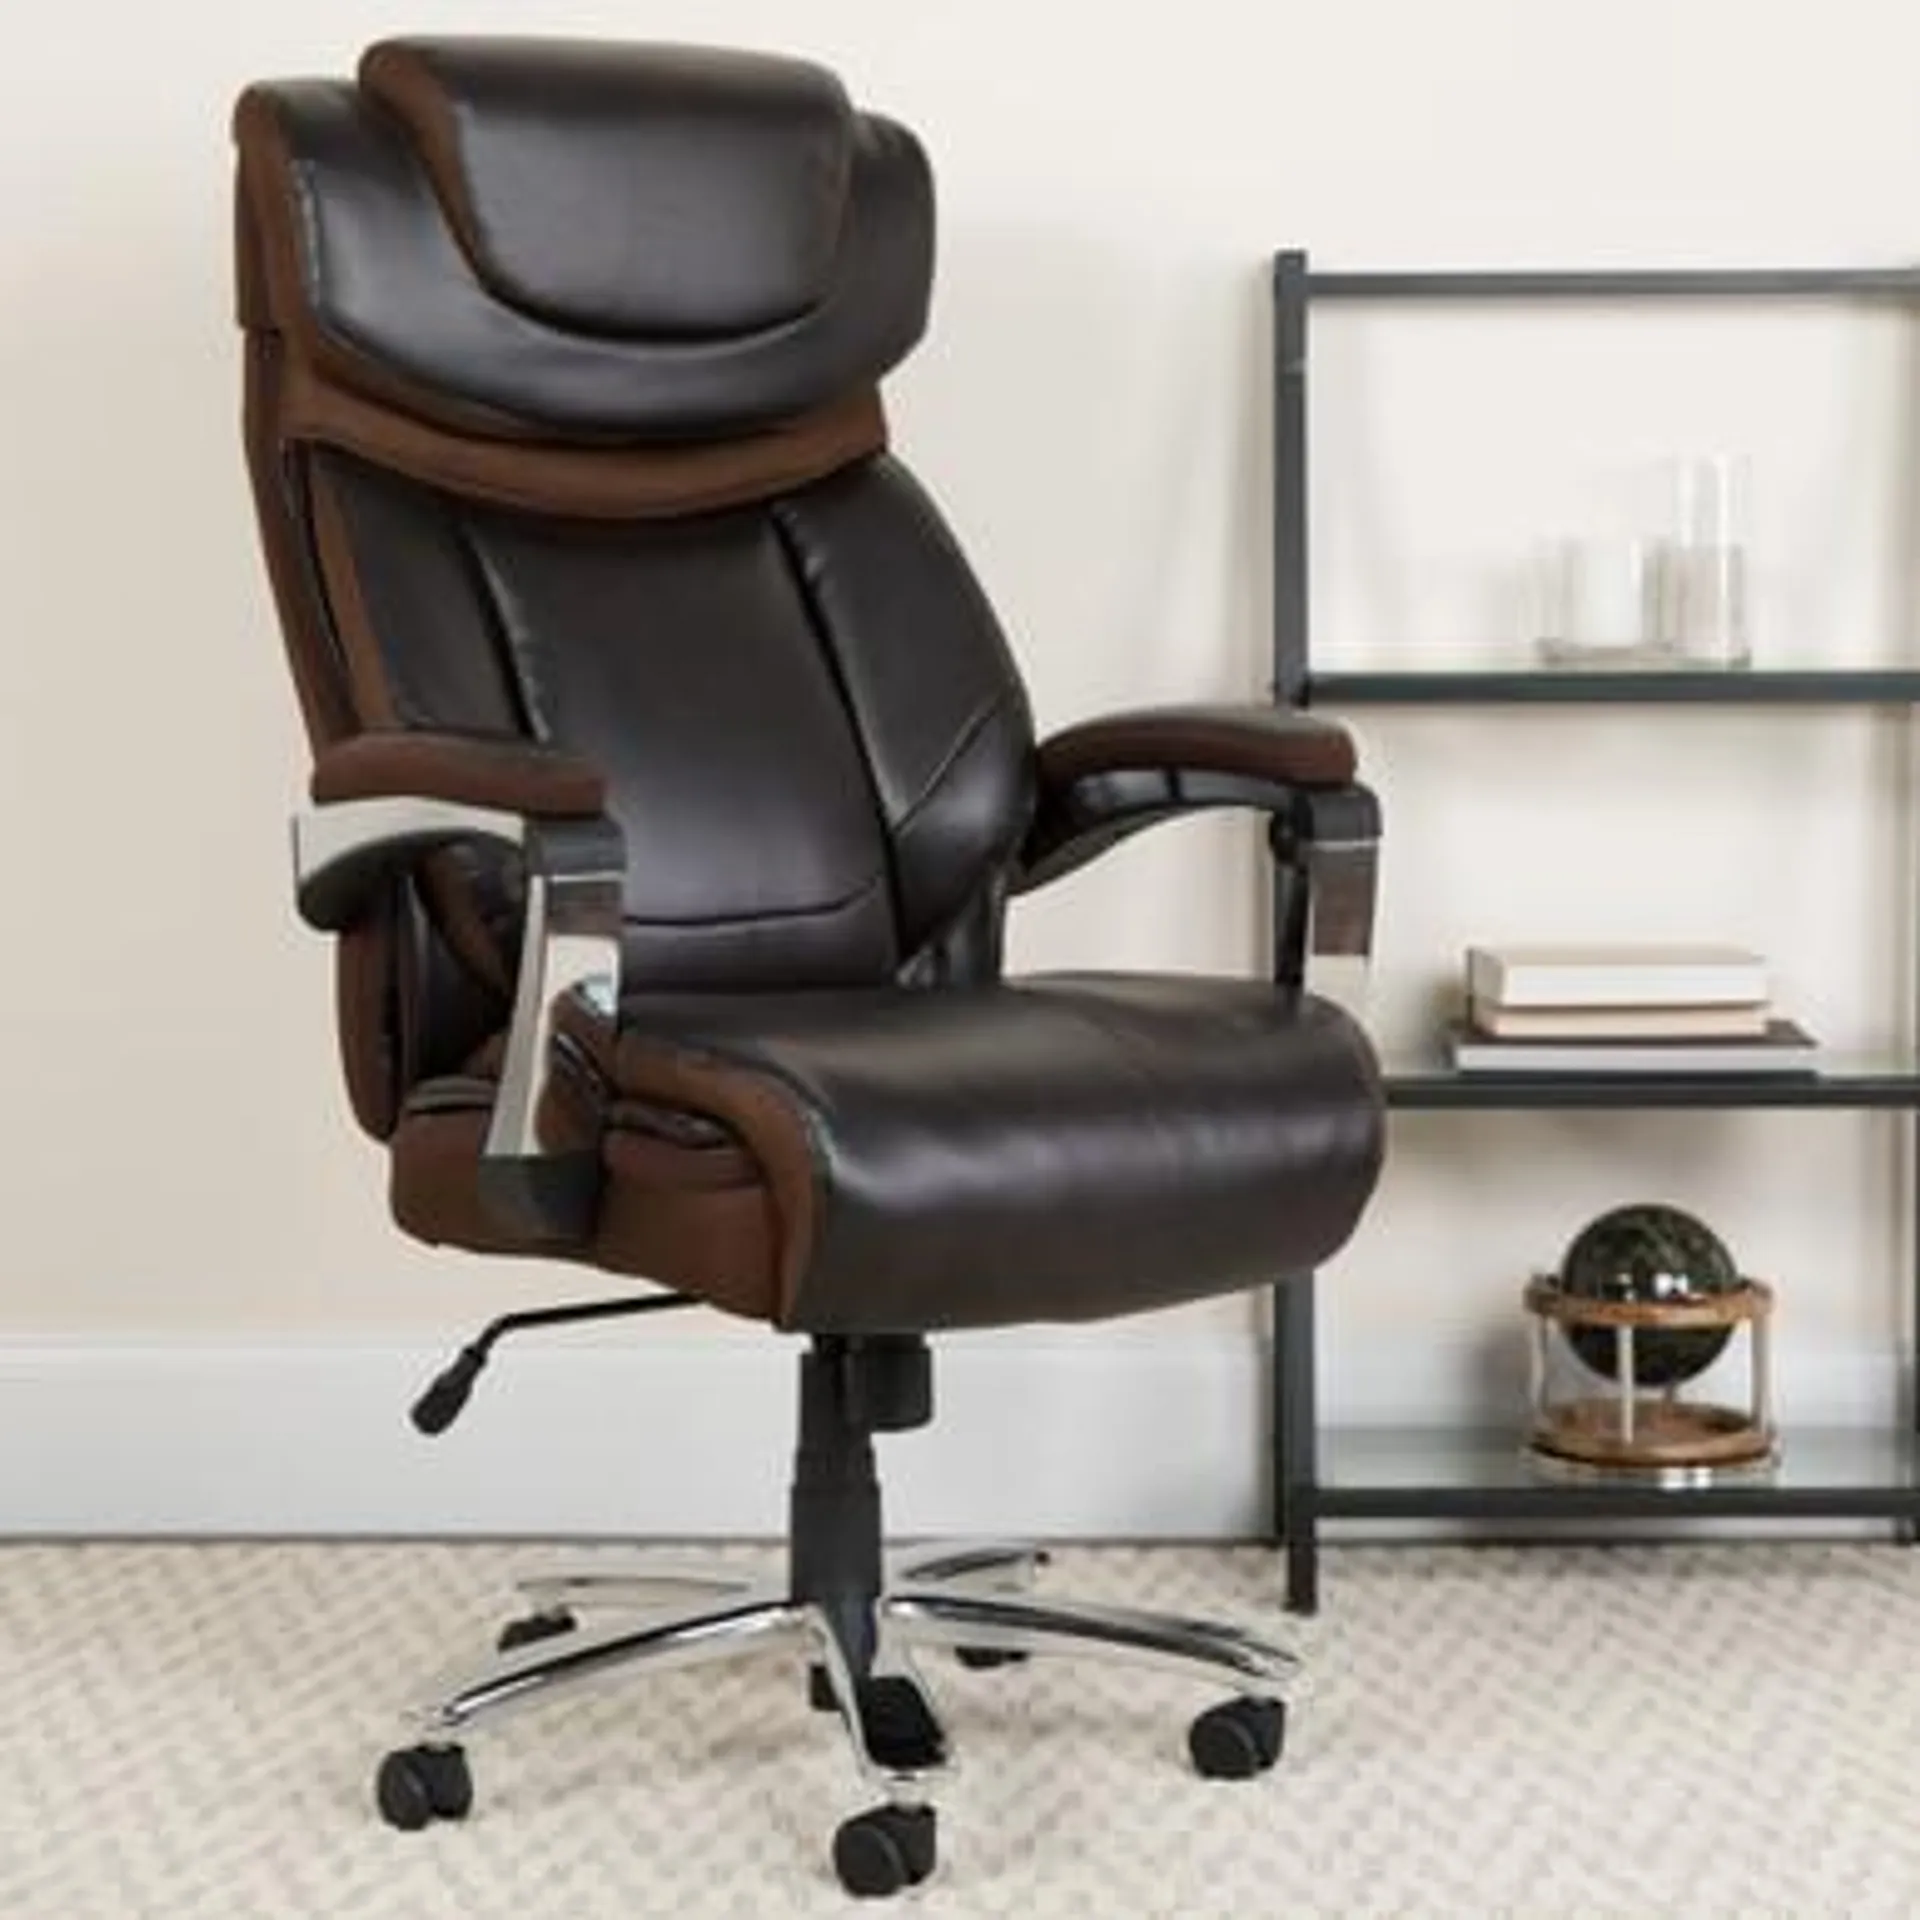 Big & Tall Office Chair | Brown LeatherSoft Executive Swivel Office Chair with Headrest and Wheels - GO2223BNGG